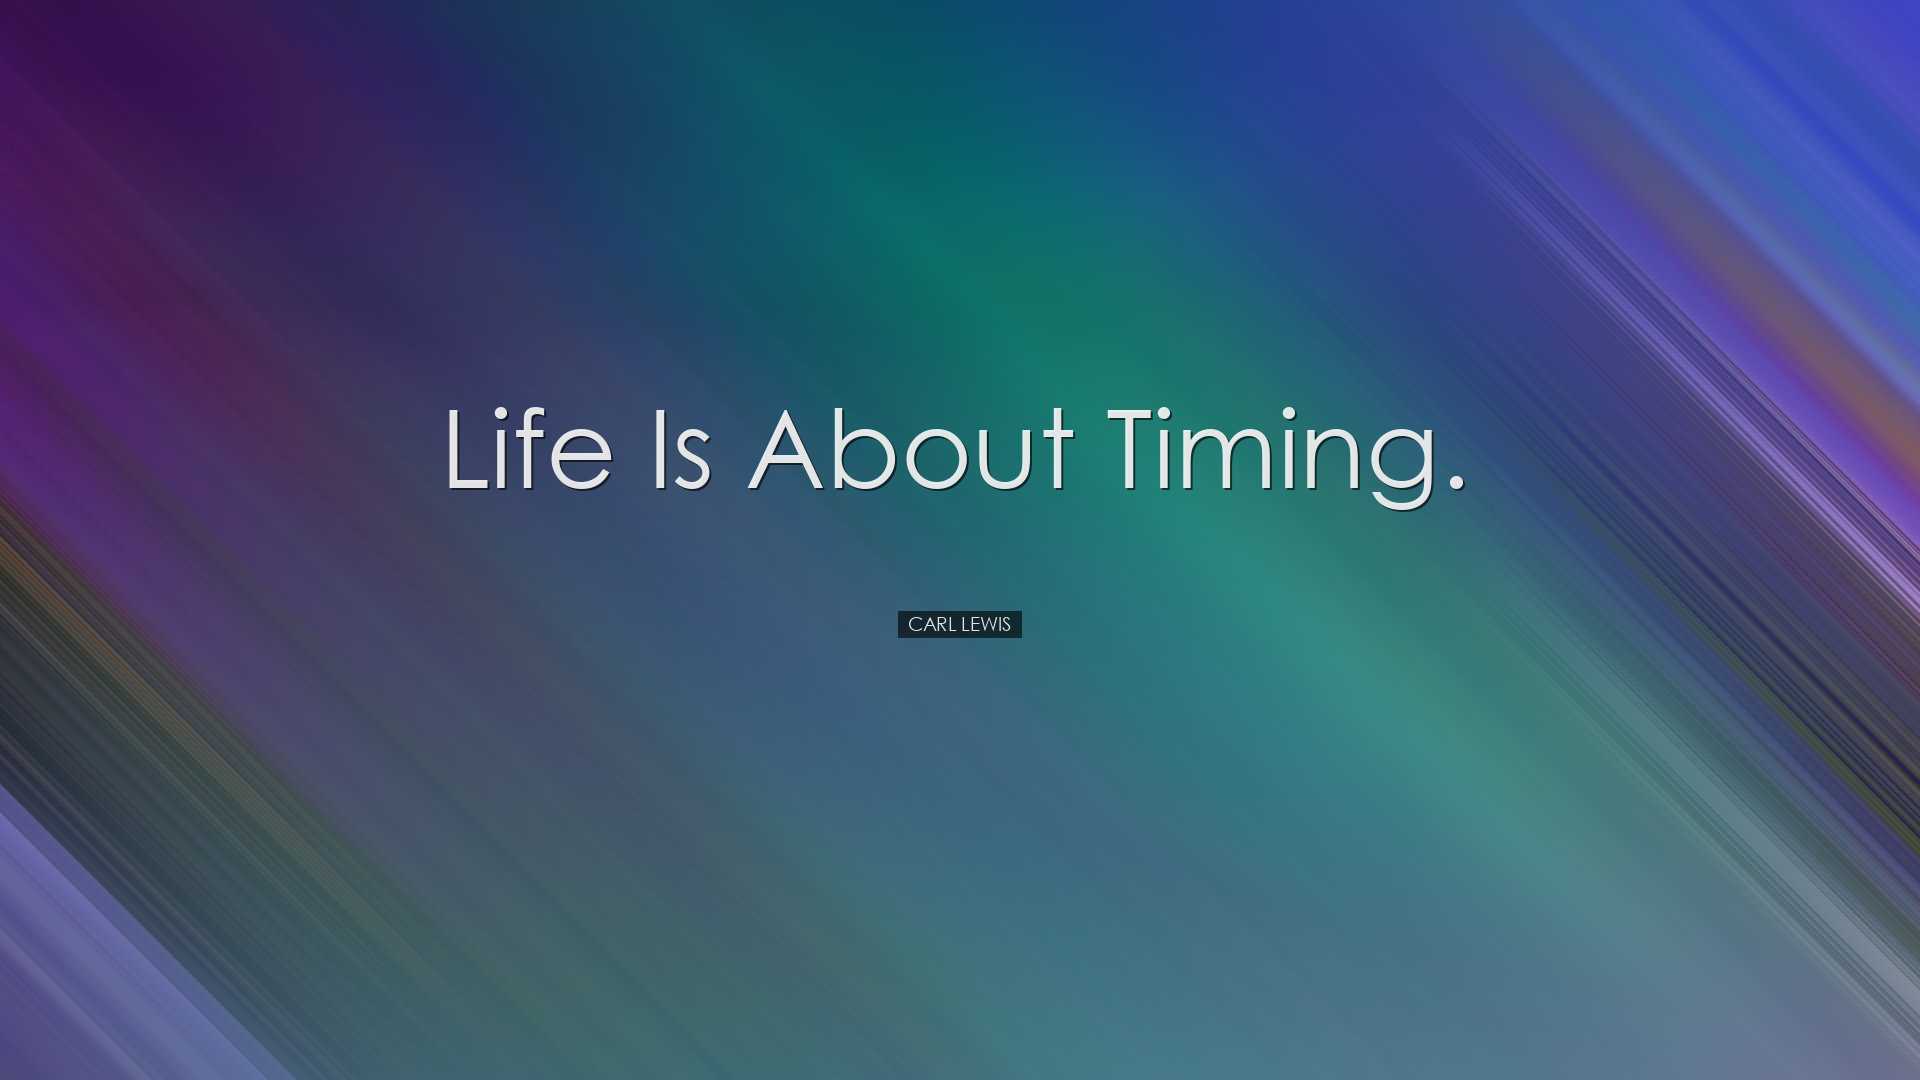 Life is about timing. - Carl Lewis